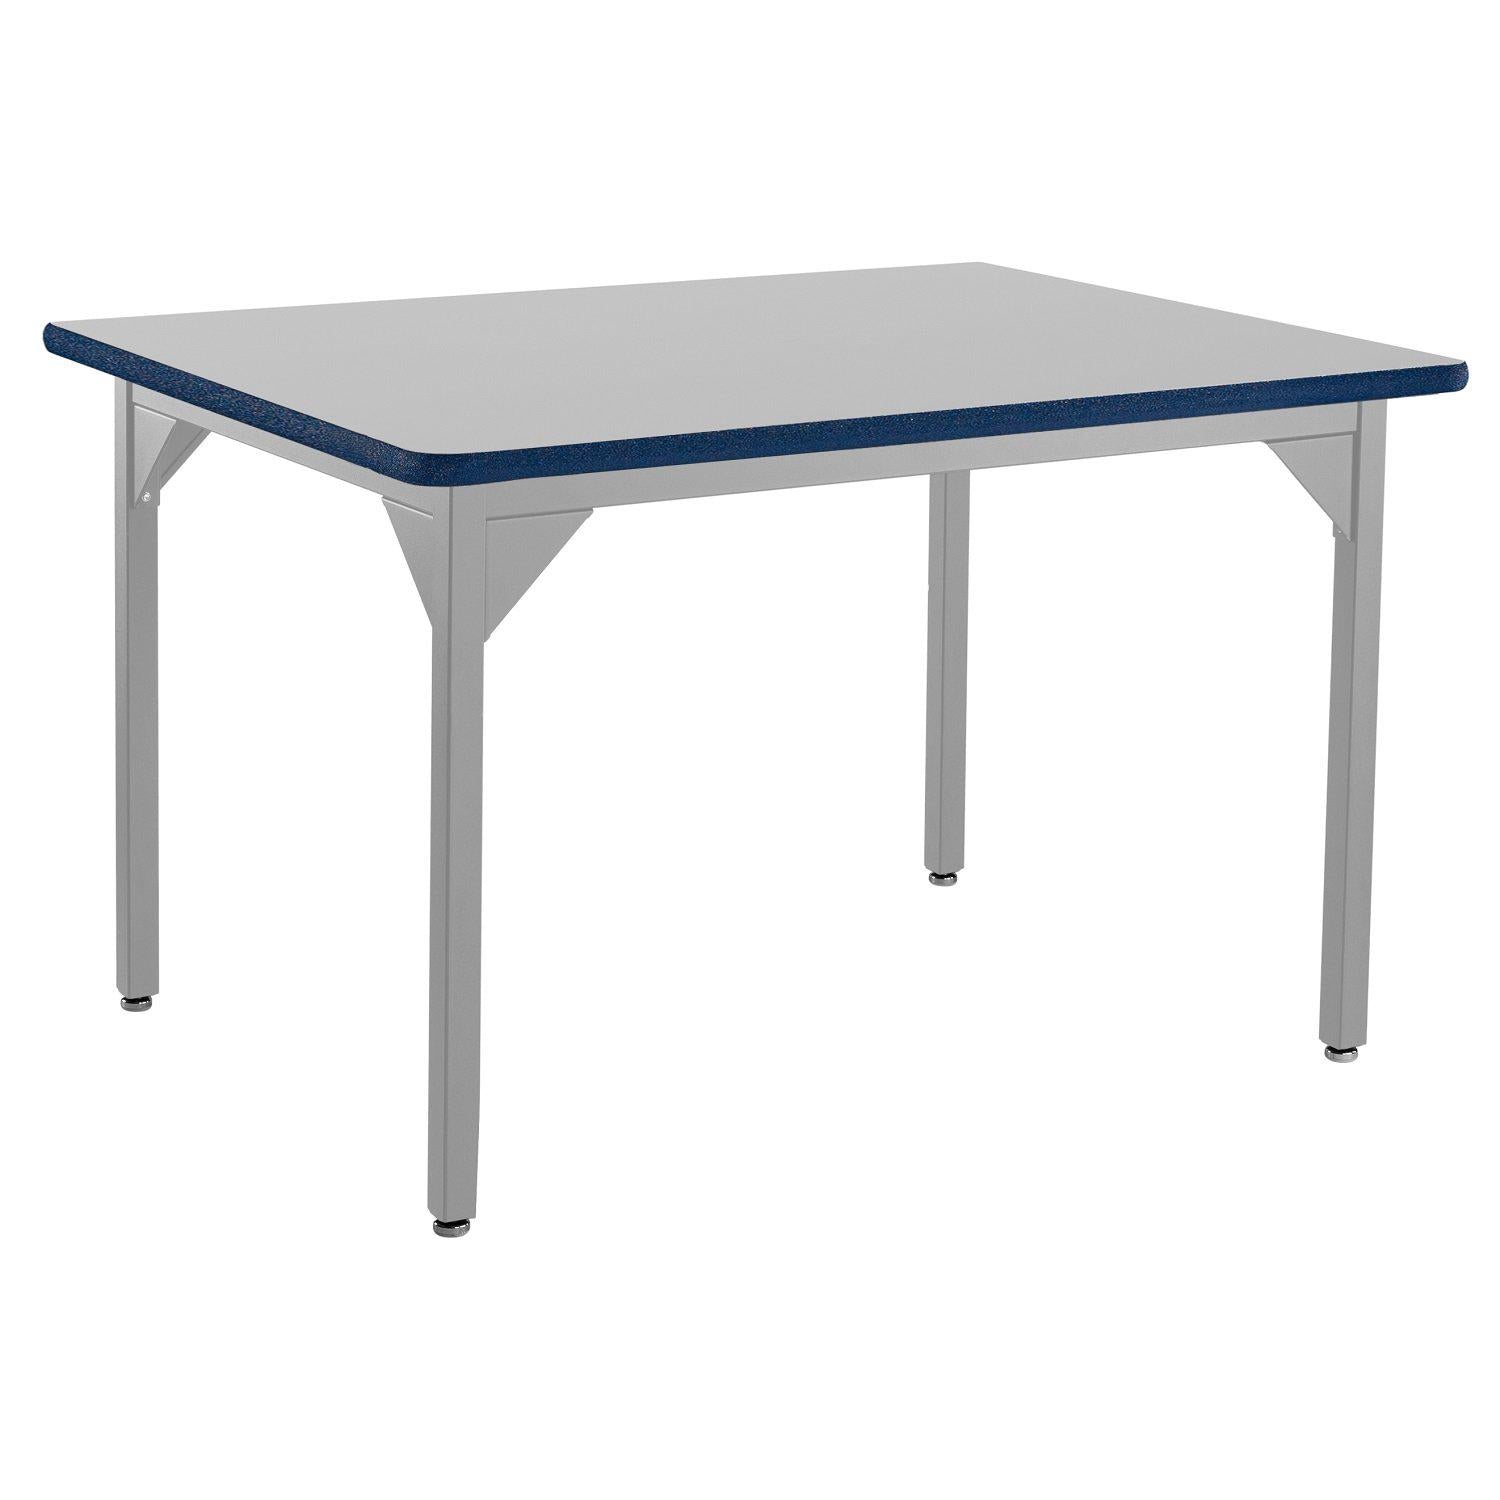 Heavy-Duty Fixed Height Utility Table, Soft Grey Frame, 36" x 42", Supreme High-Pressure Laminate Top with Black ProtectEdge